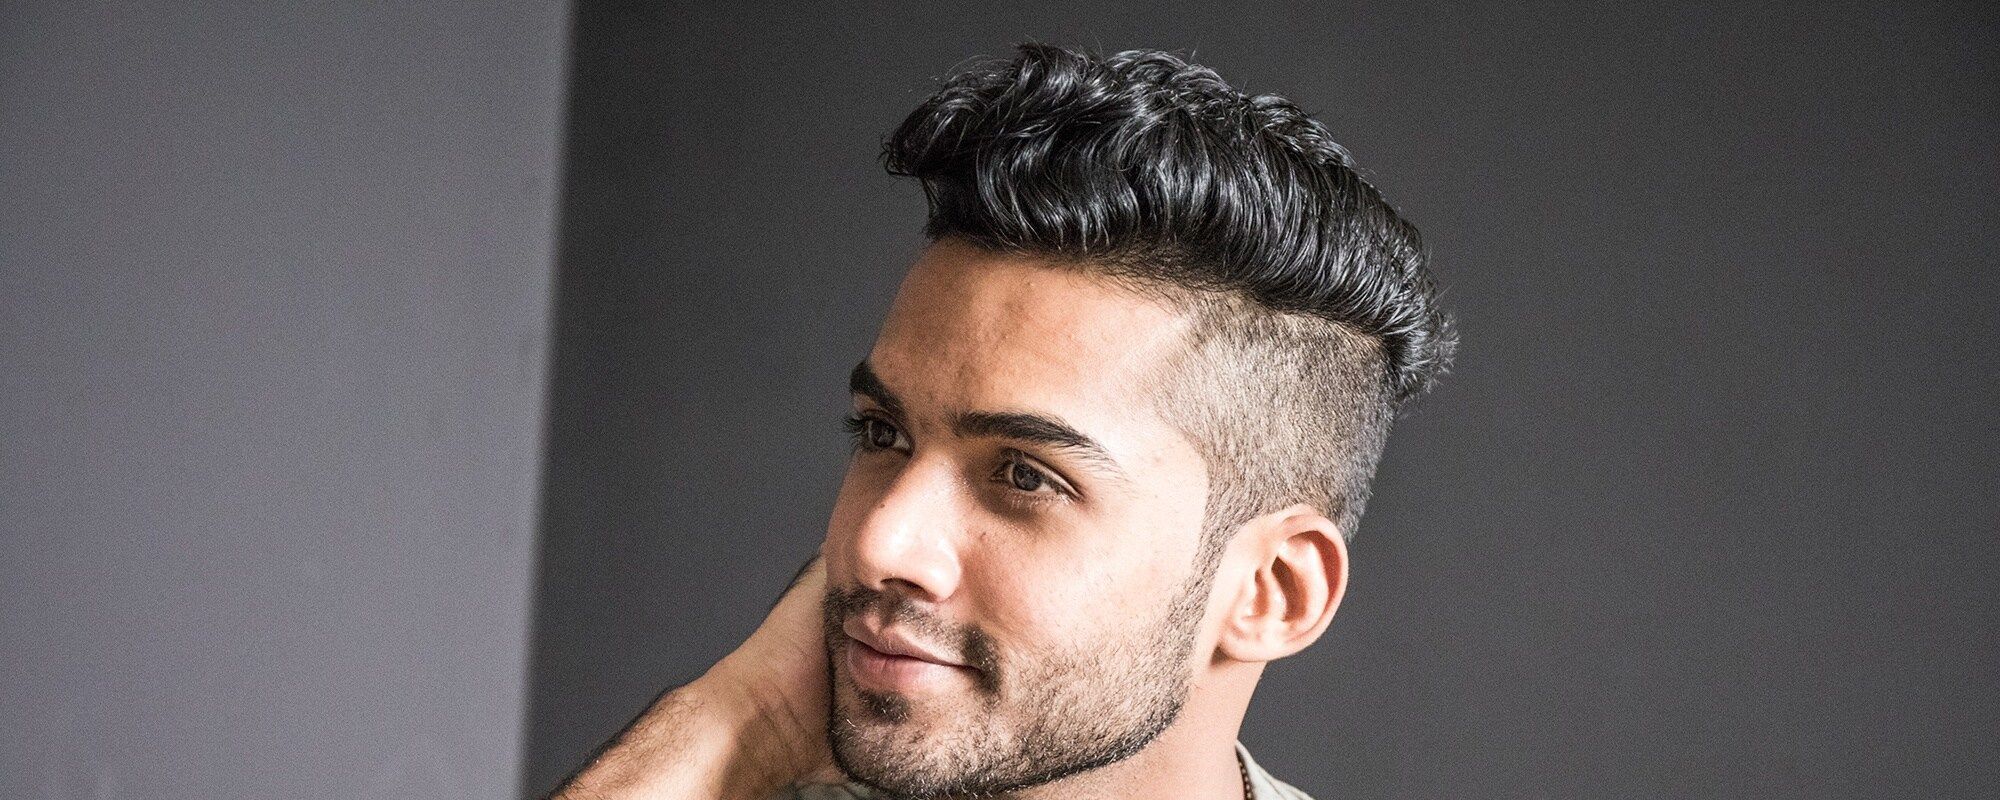 Top 10 Classy and Popular Undercut Hairstyles for Men | Styles At Life